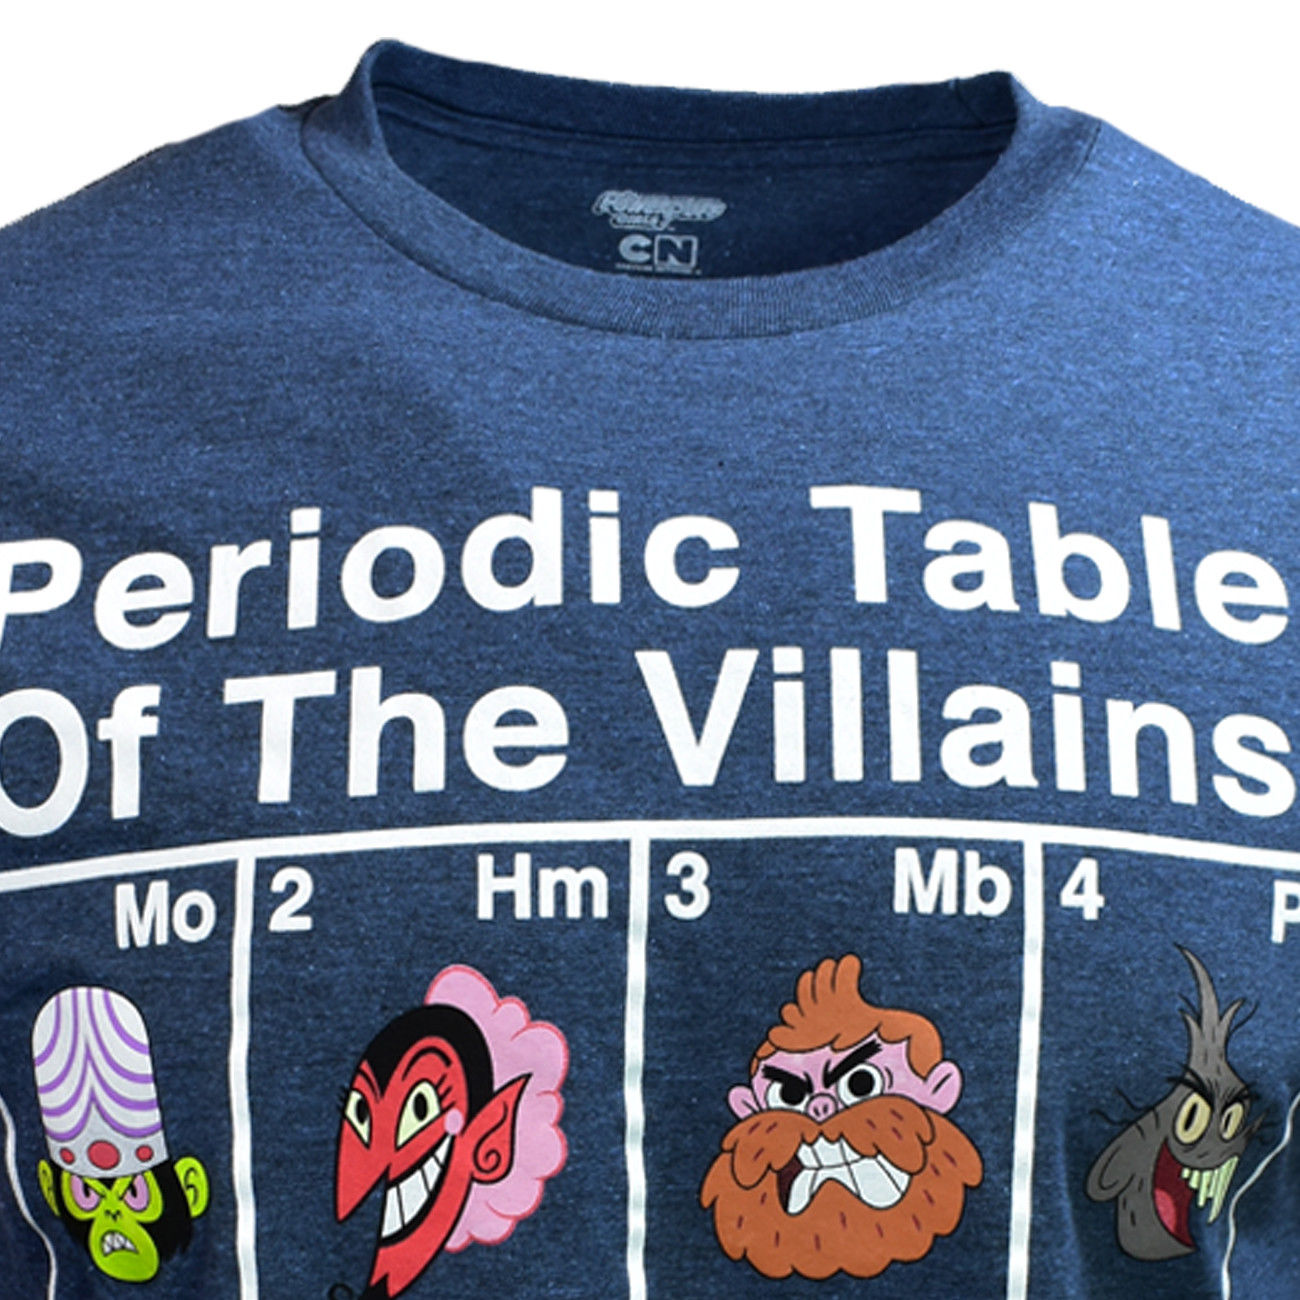 Power Puff Girls Periodic Table Mens Graphic Tee